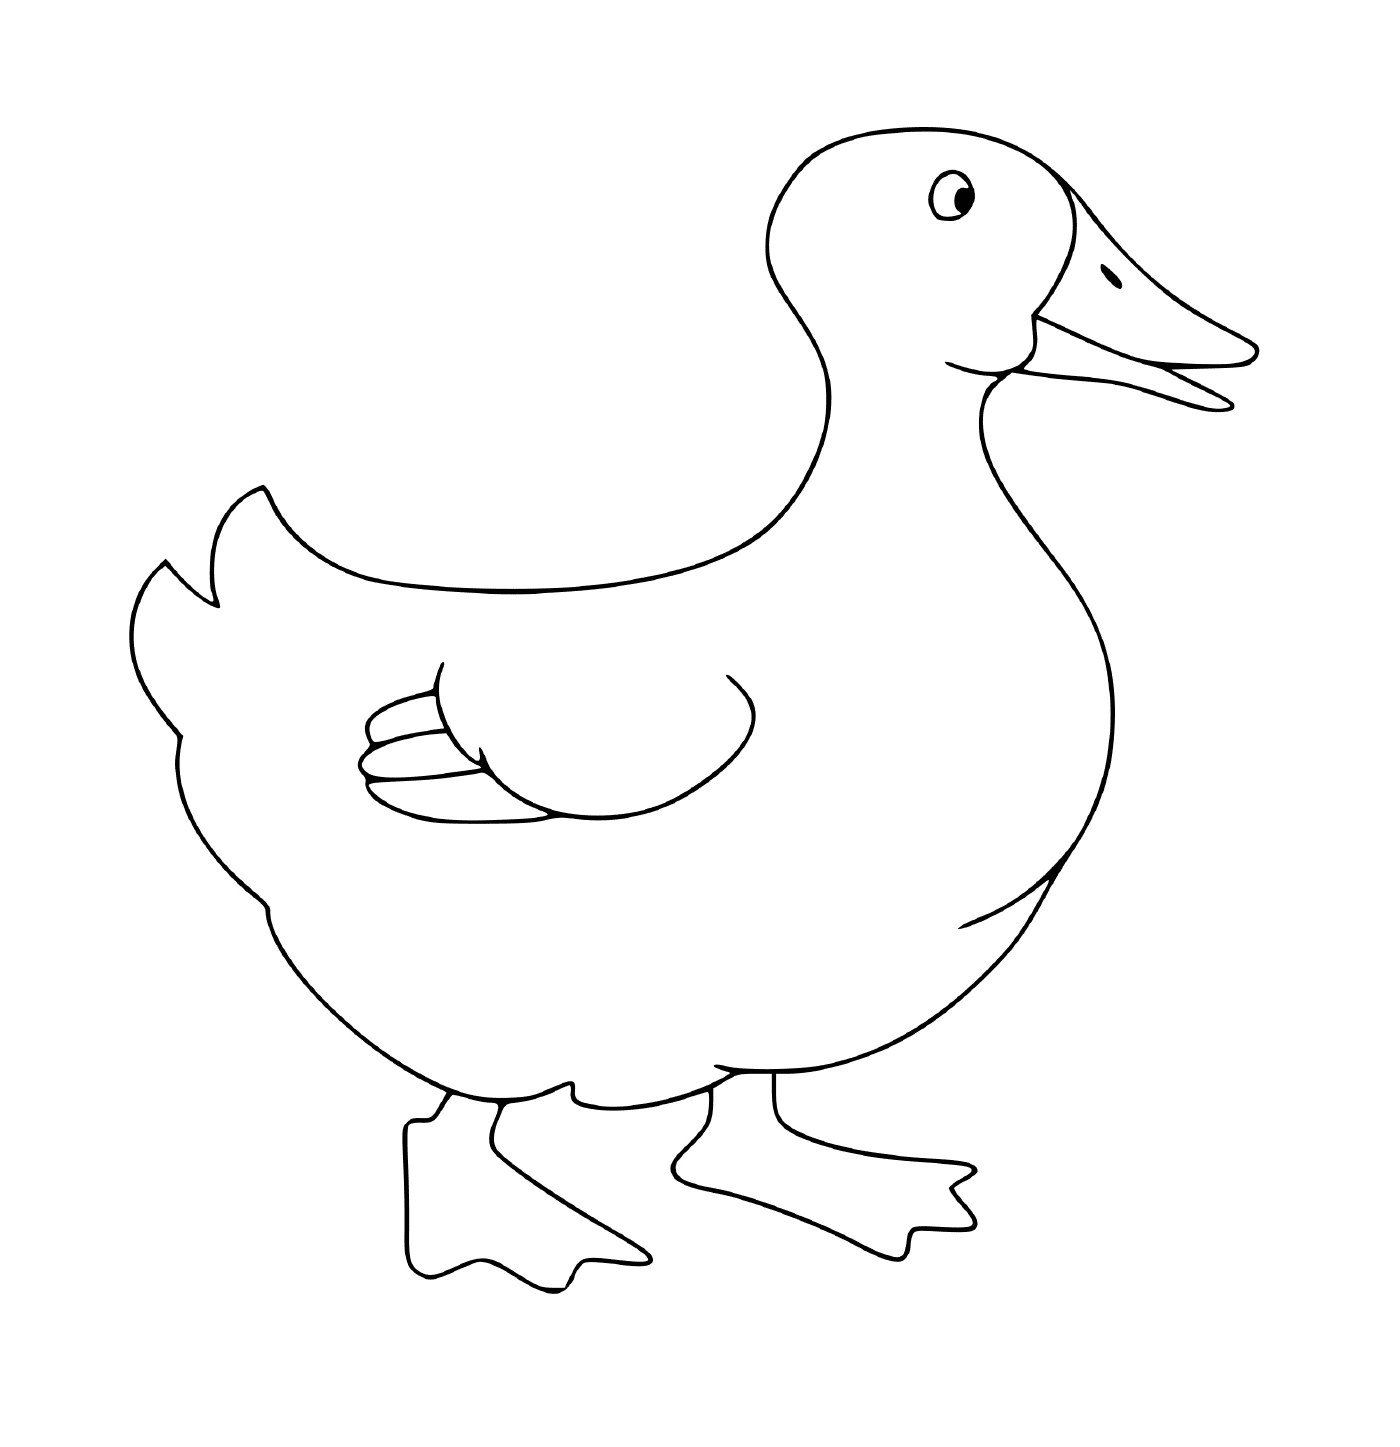  Duck swimming gracefully 